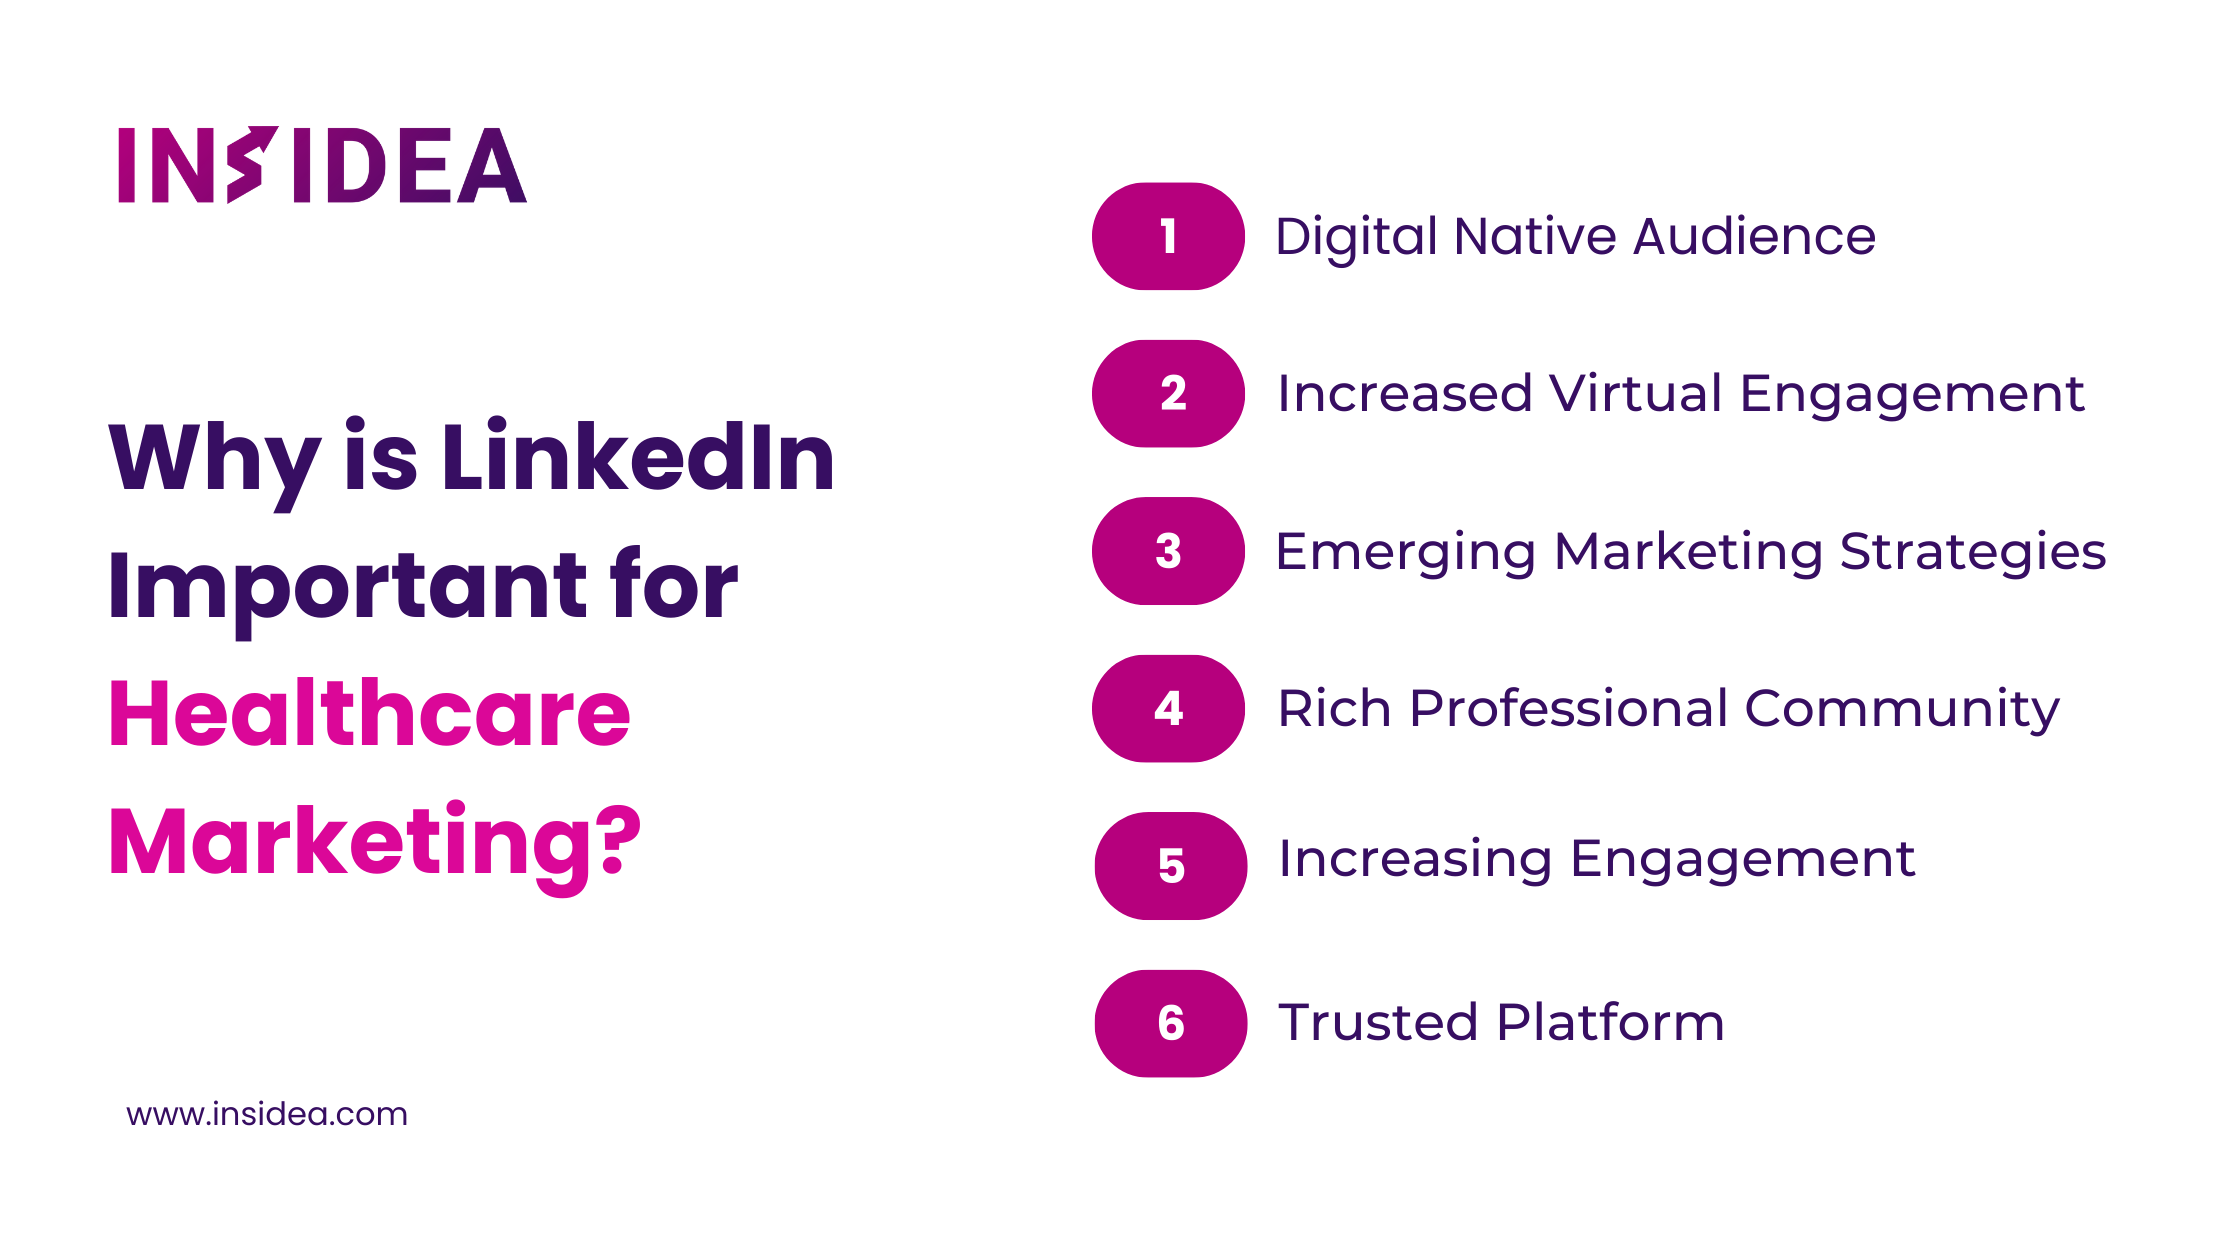 Why is LinkedIn Important for Healthcare Marketing